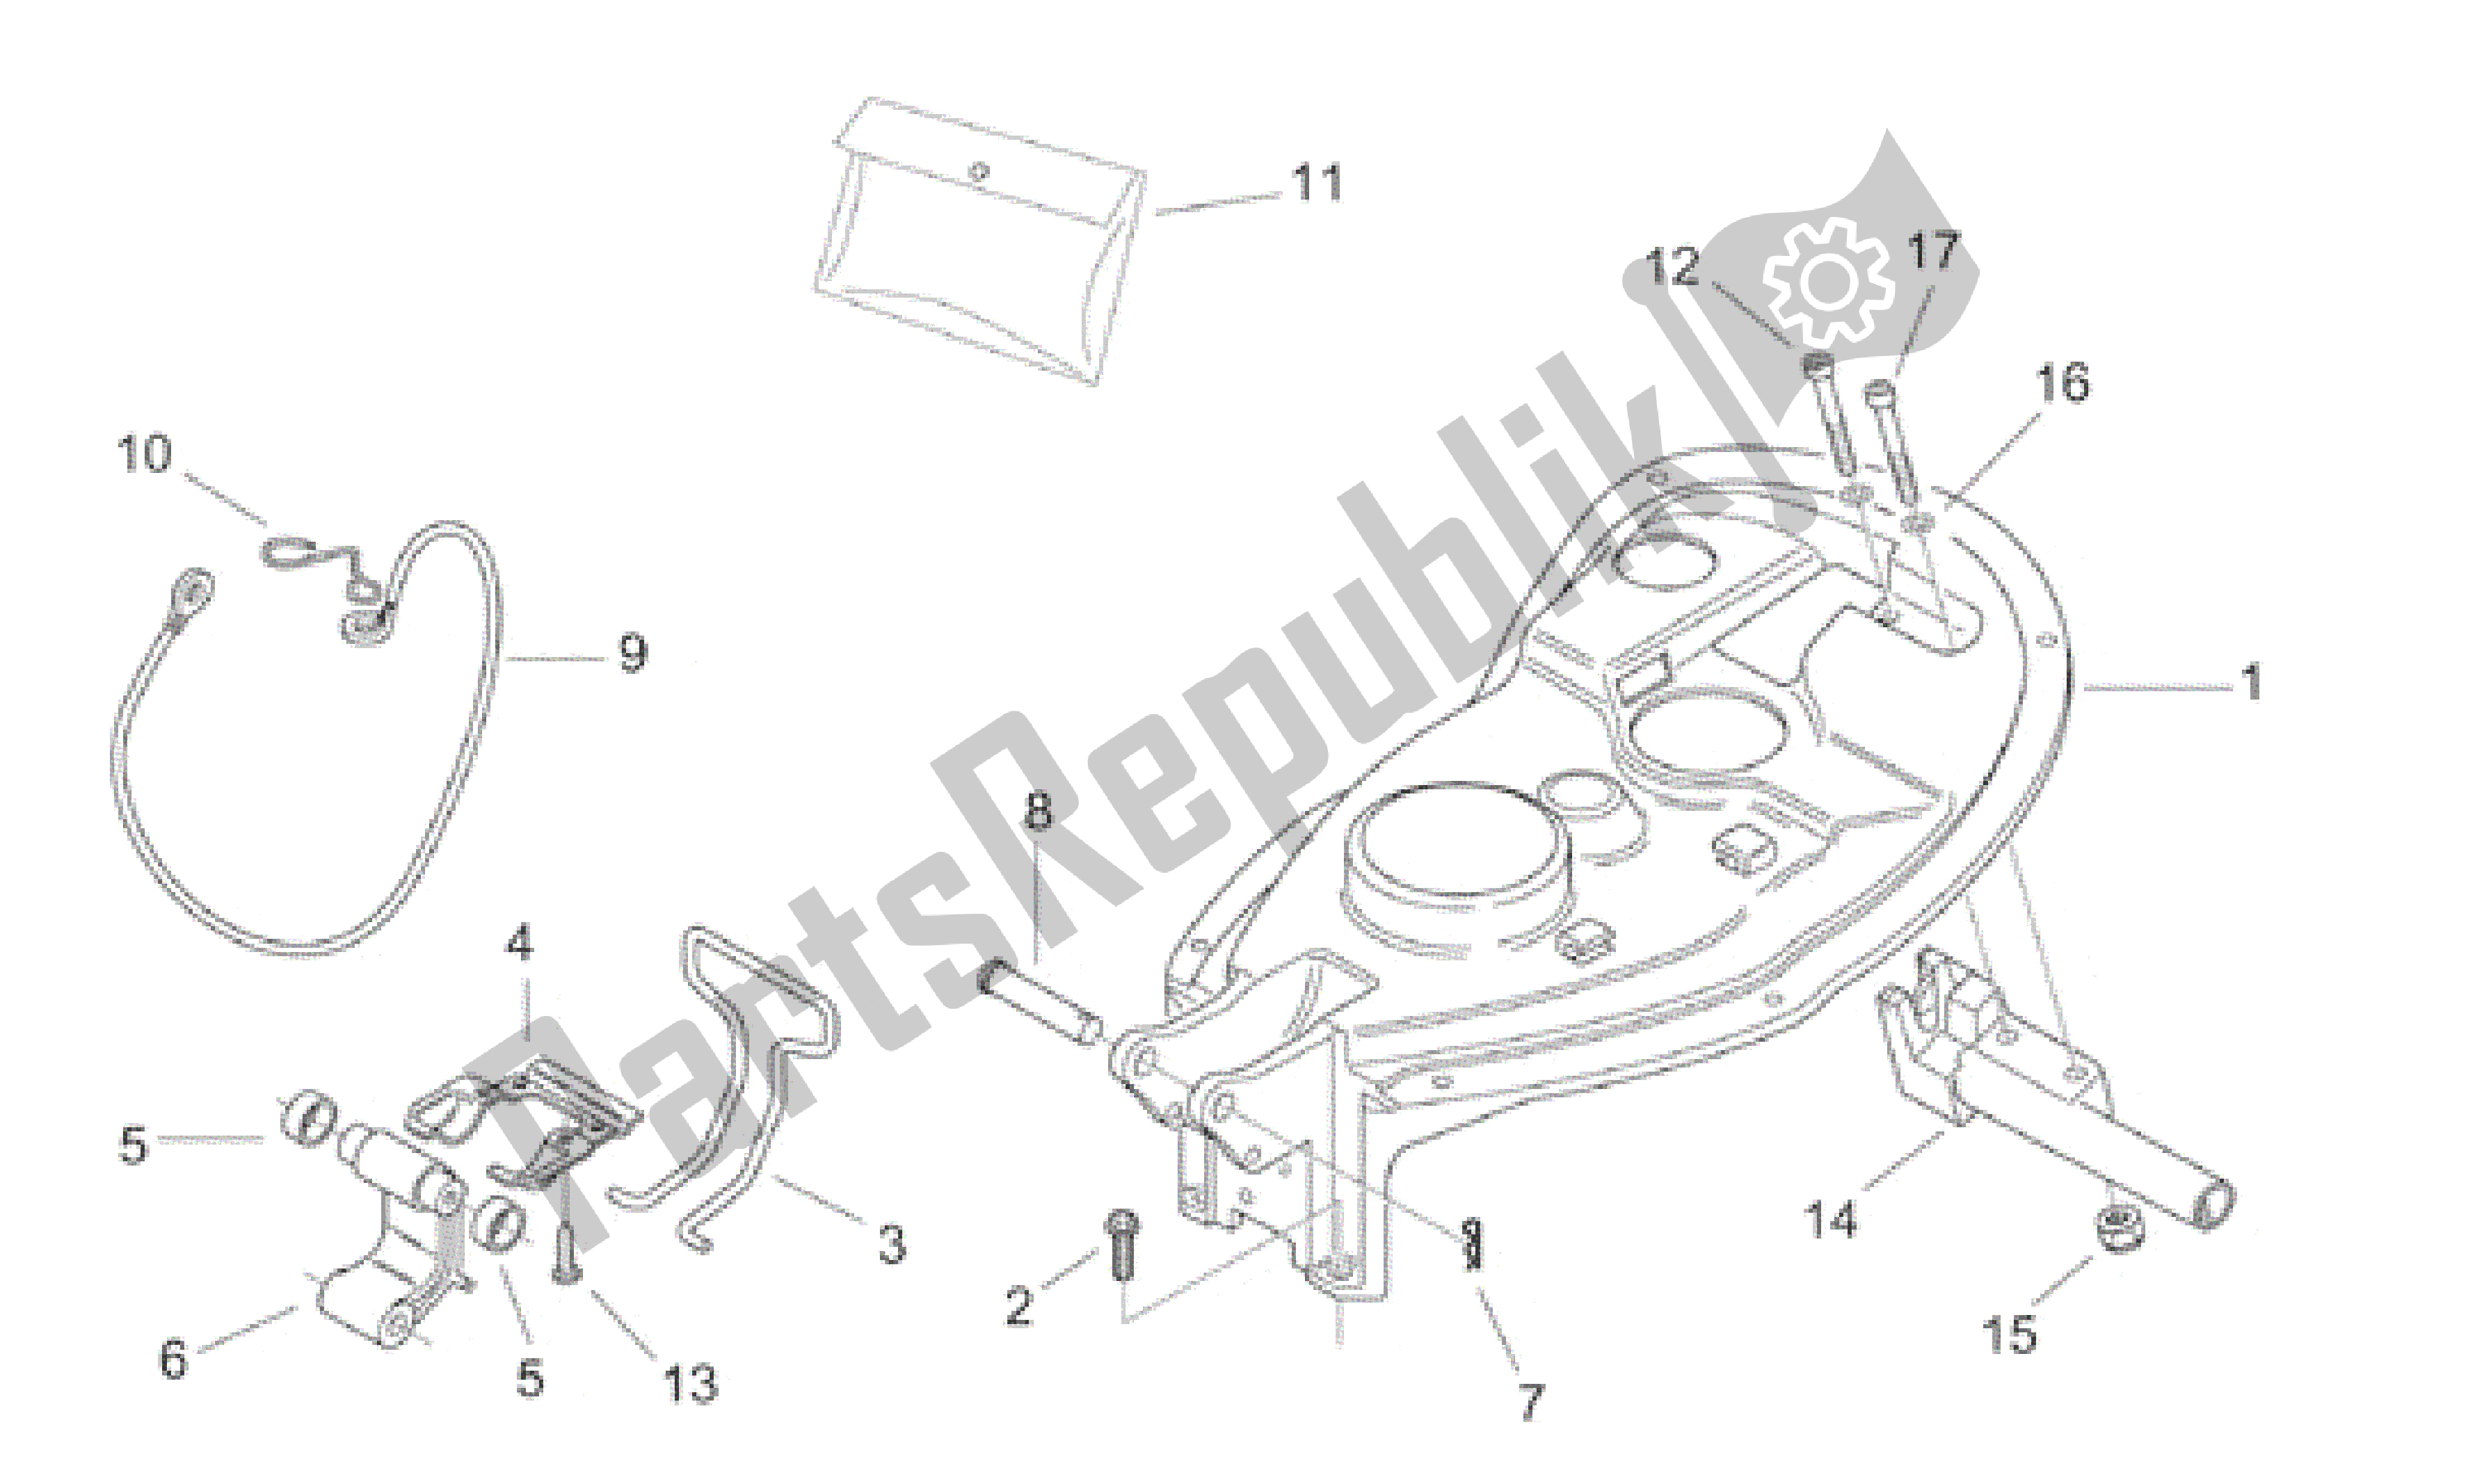 All parts for the Rear Body Ii - Seat.comp. Of the Aprilia Scarabeo 50 2000 - 2005